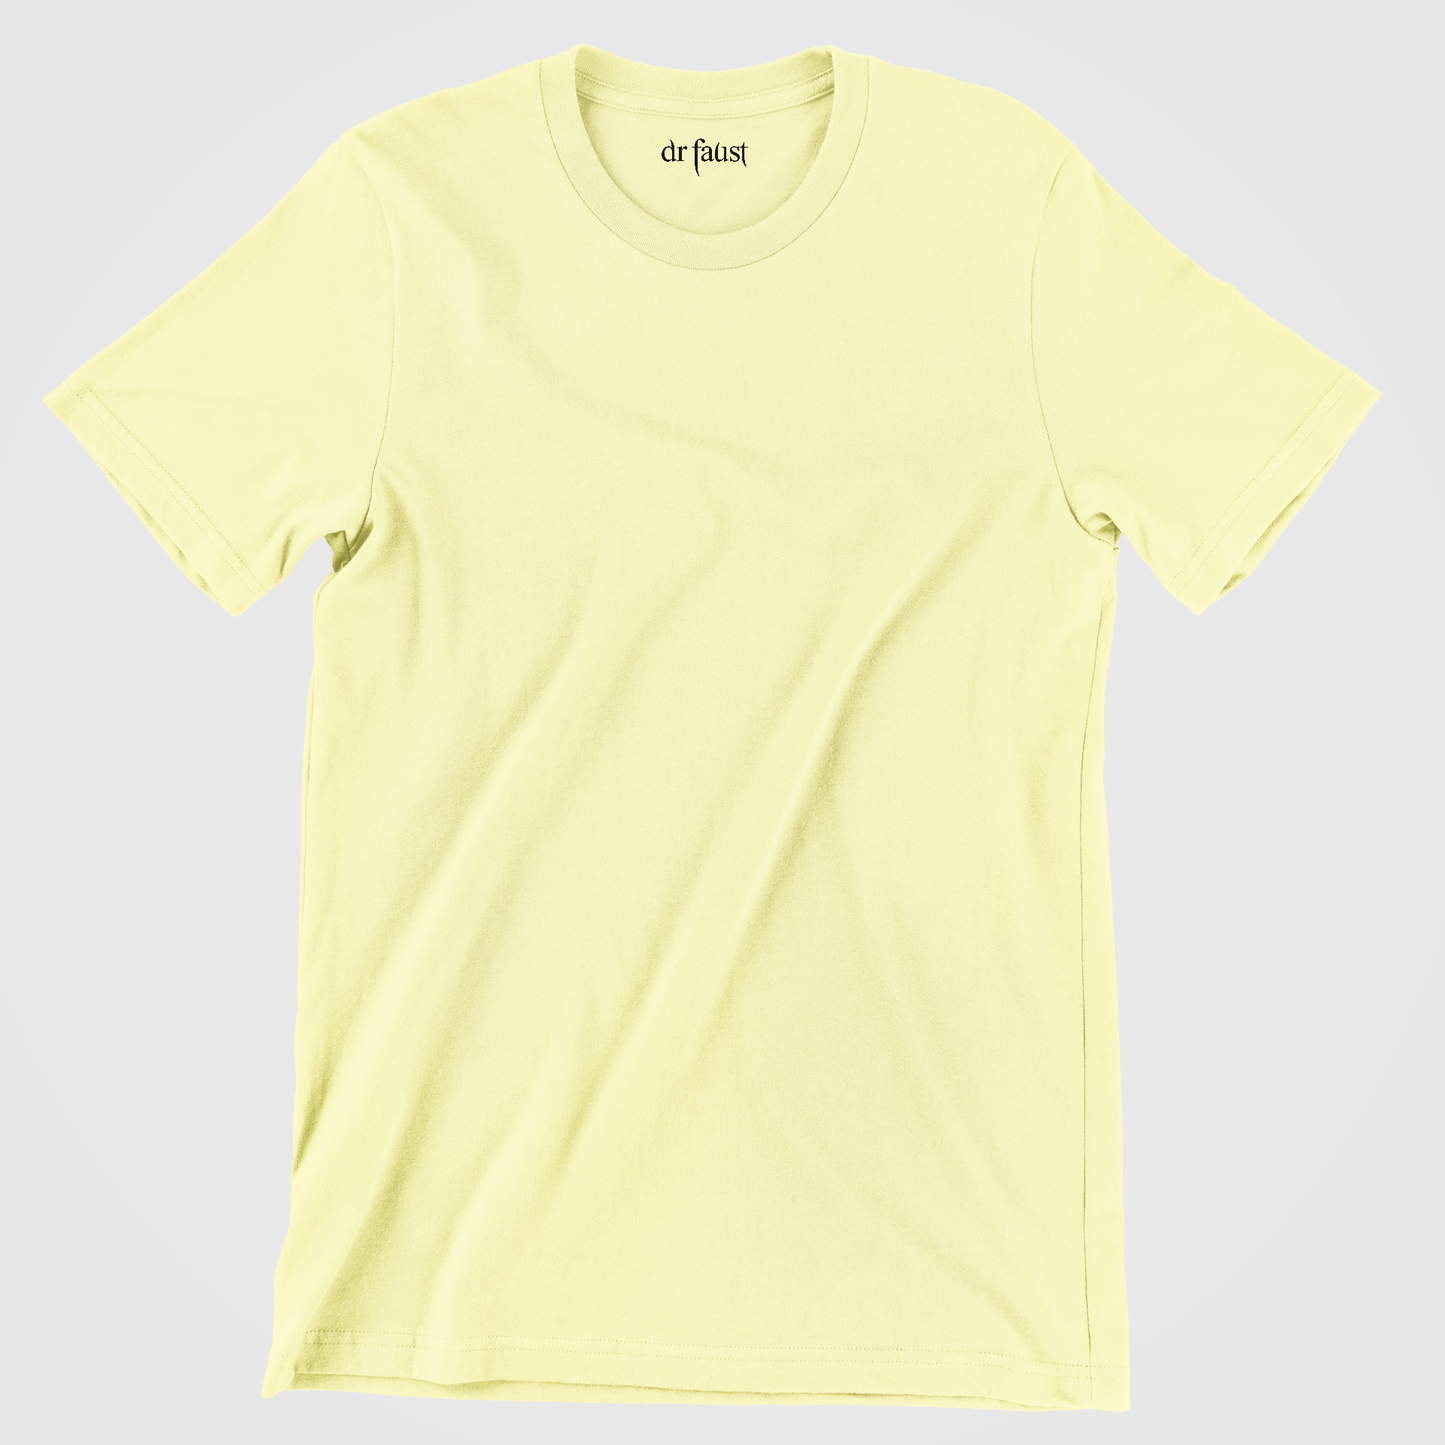 Dr Faust Solid Light Yellow Unisex T-shirt.